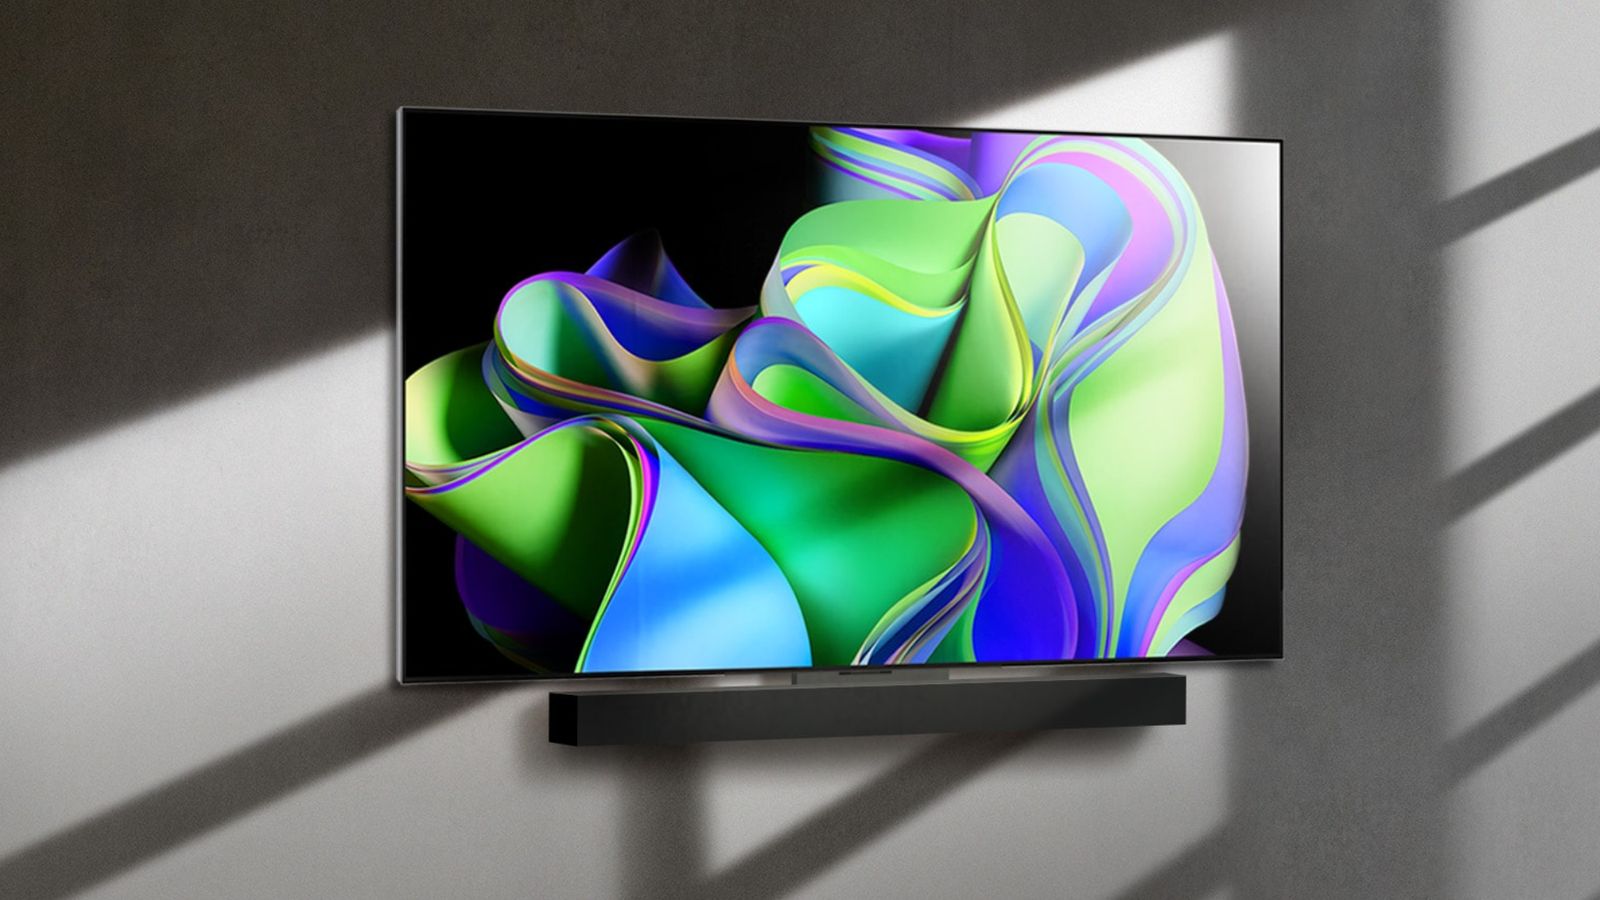 Flatscreen LG TV featuring a green and blue pattern on the display mounted to a grey wall.